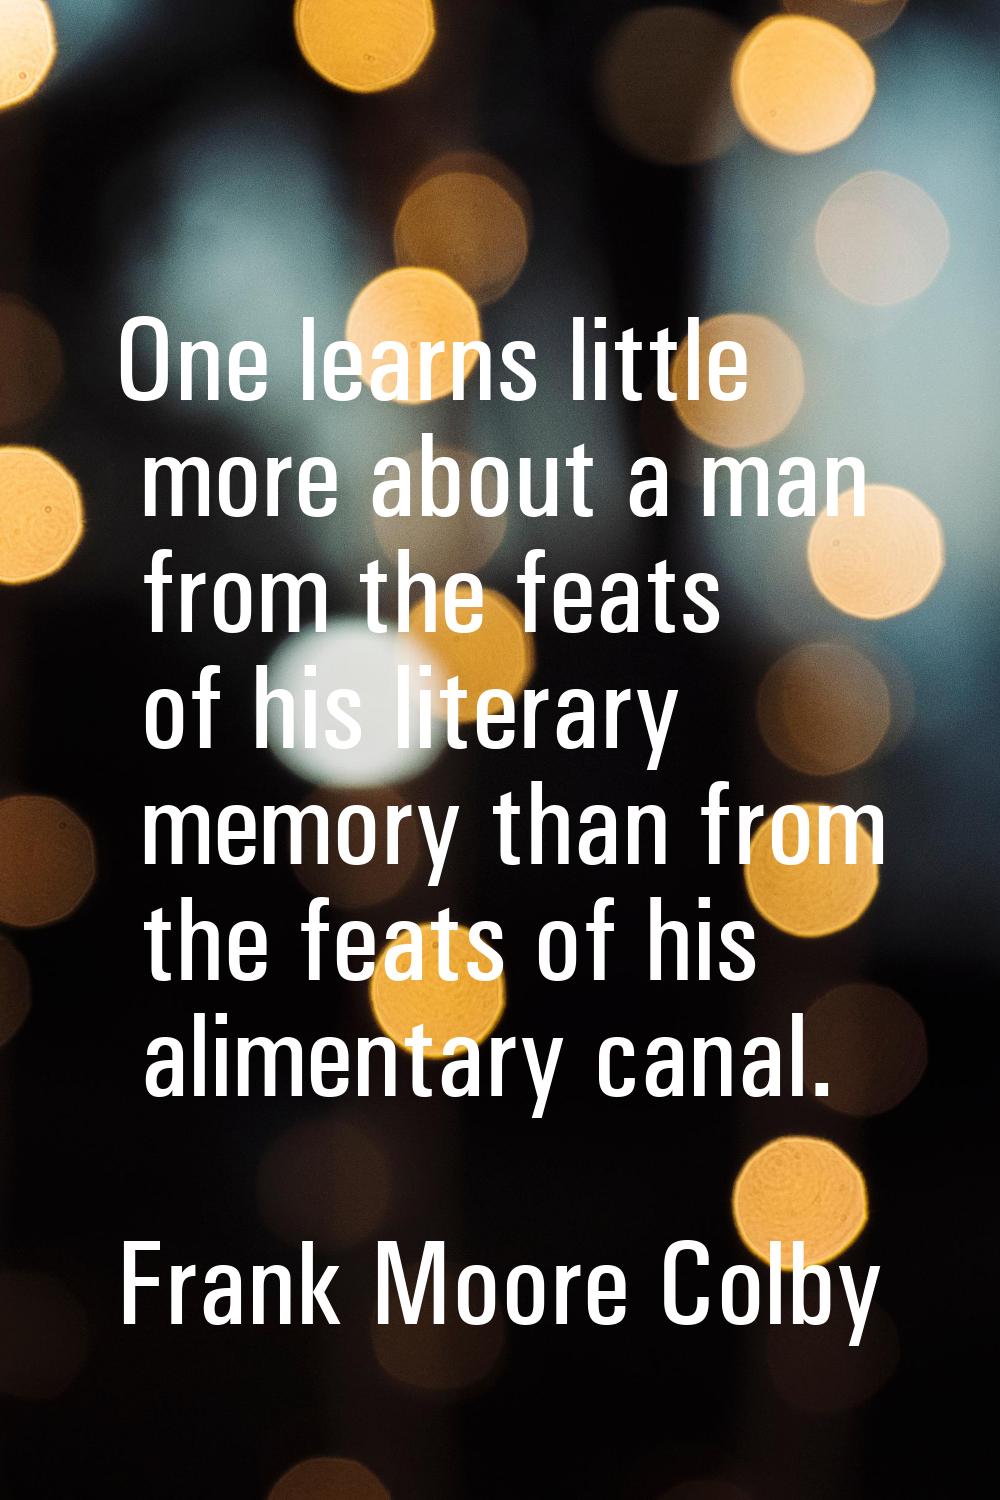 One learns little more about a man from the feats of his literary memory than from the feats of his